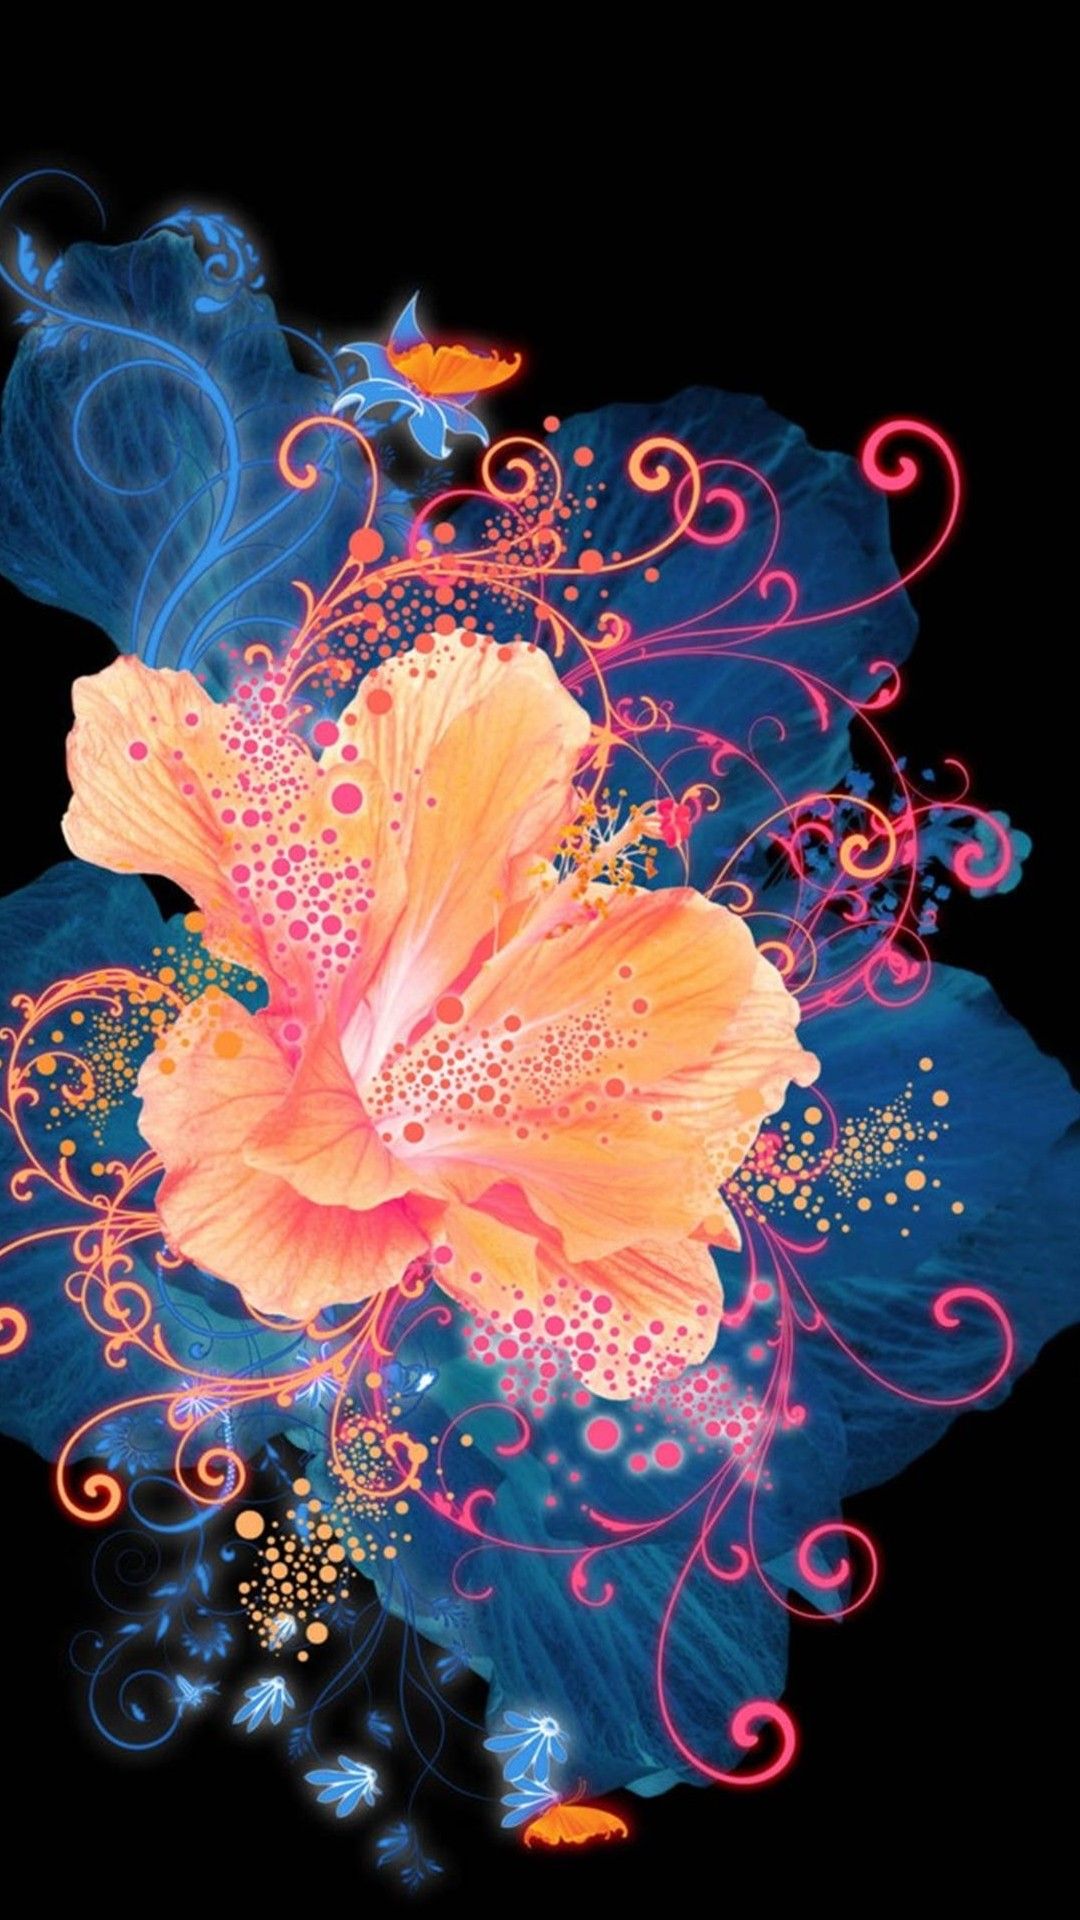 HD Abstract Flower Neon Painting Android Wallpaper free download